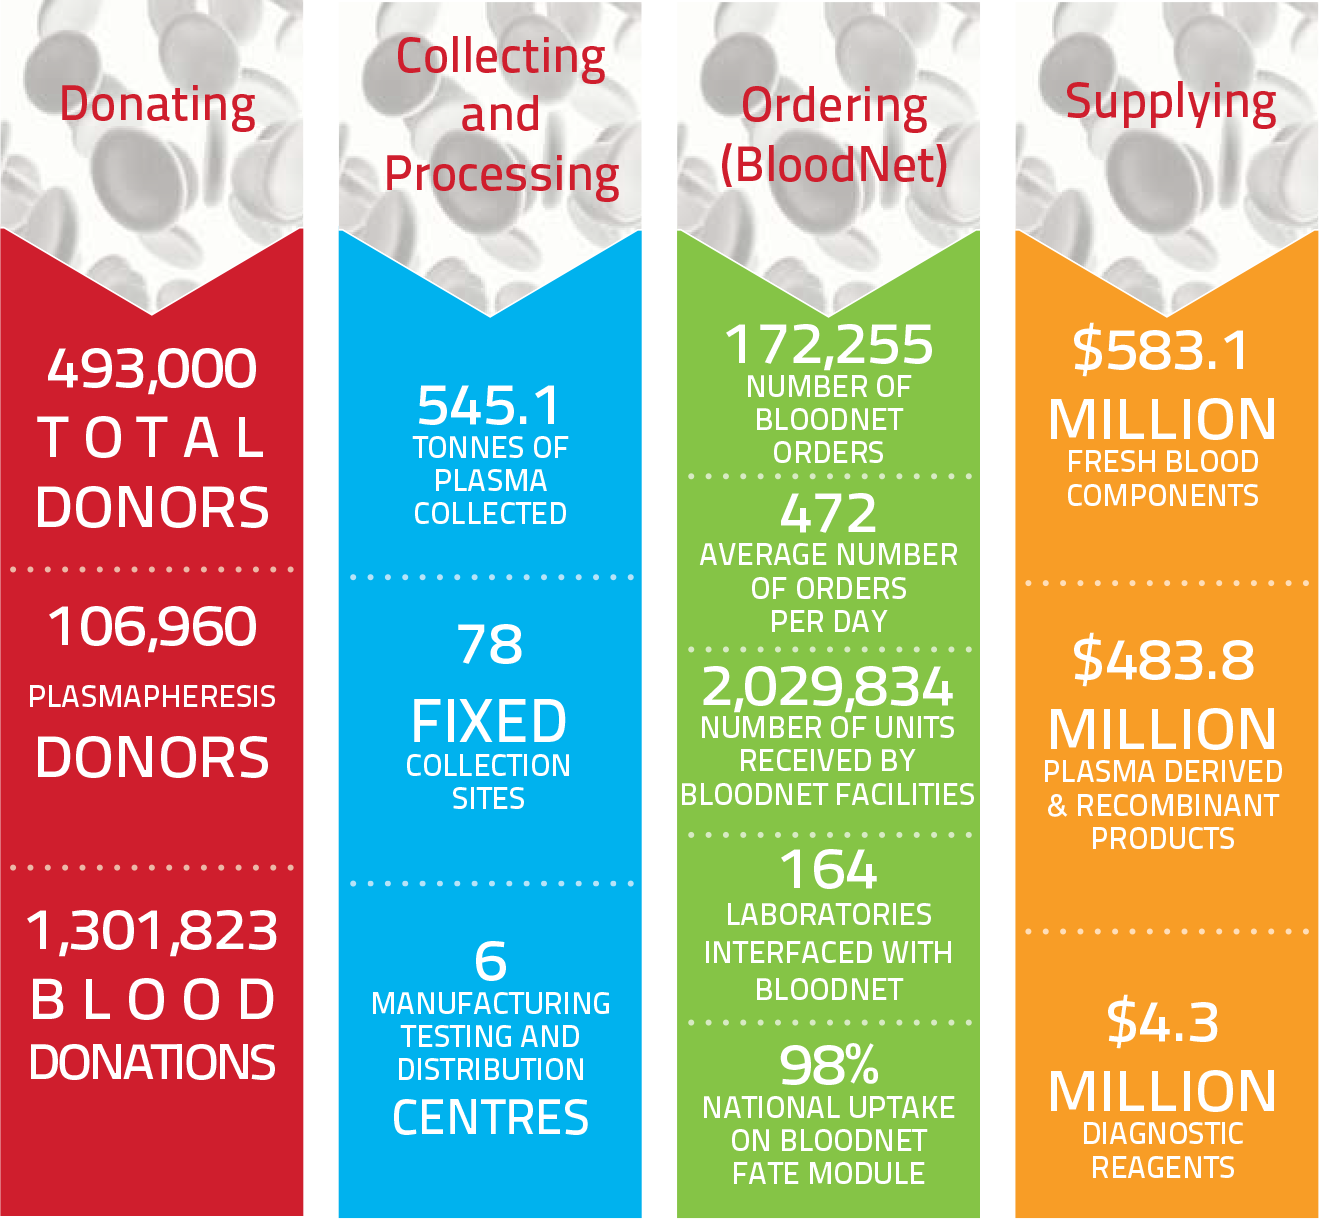 2013-14 snapshot of the blood sector- Donating, Collecting and Processing, Ordering(BloodNet) and Supplying